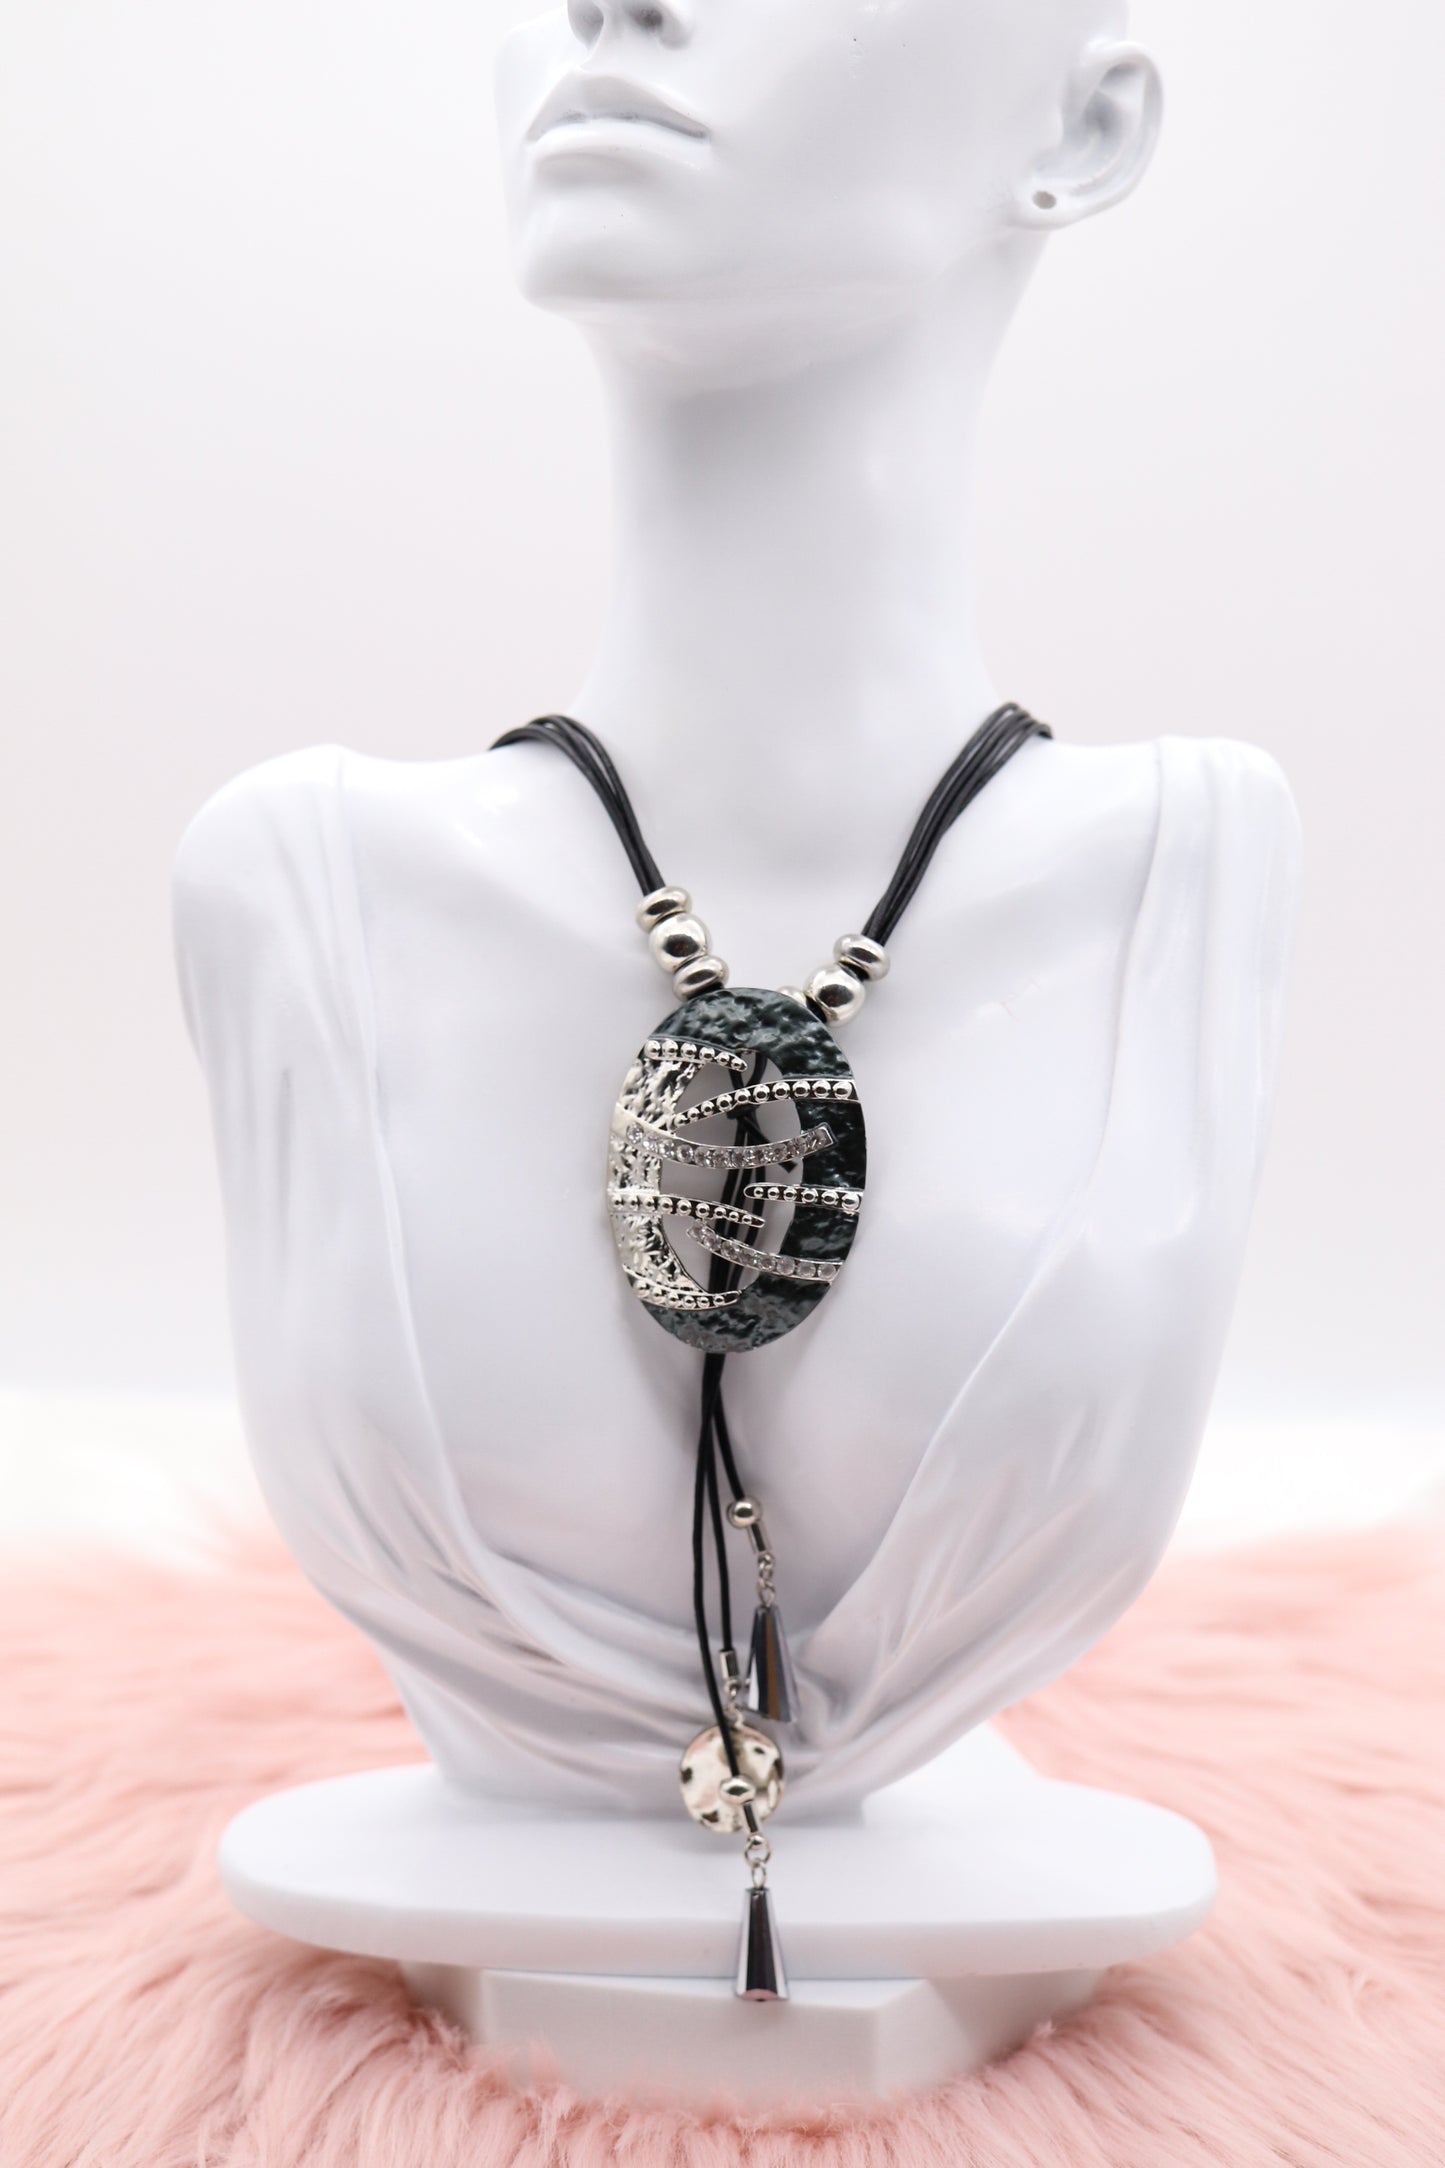 Metallic Black and Silver Pendant With Dangling Stones and Multi Black Rope Necklace